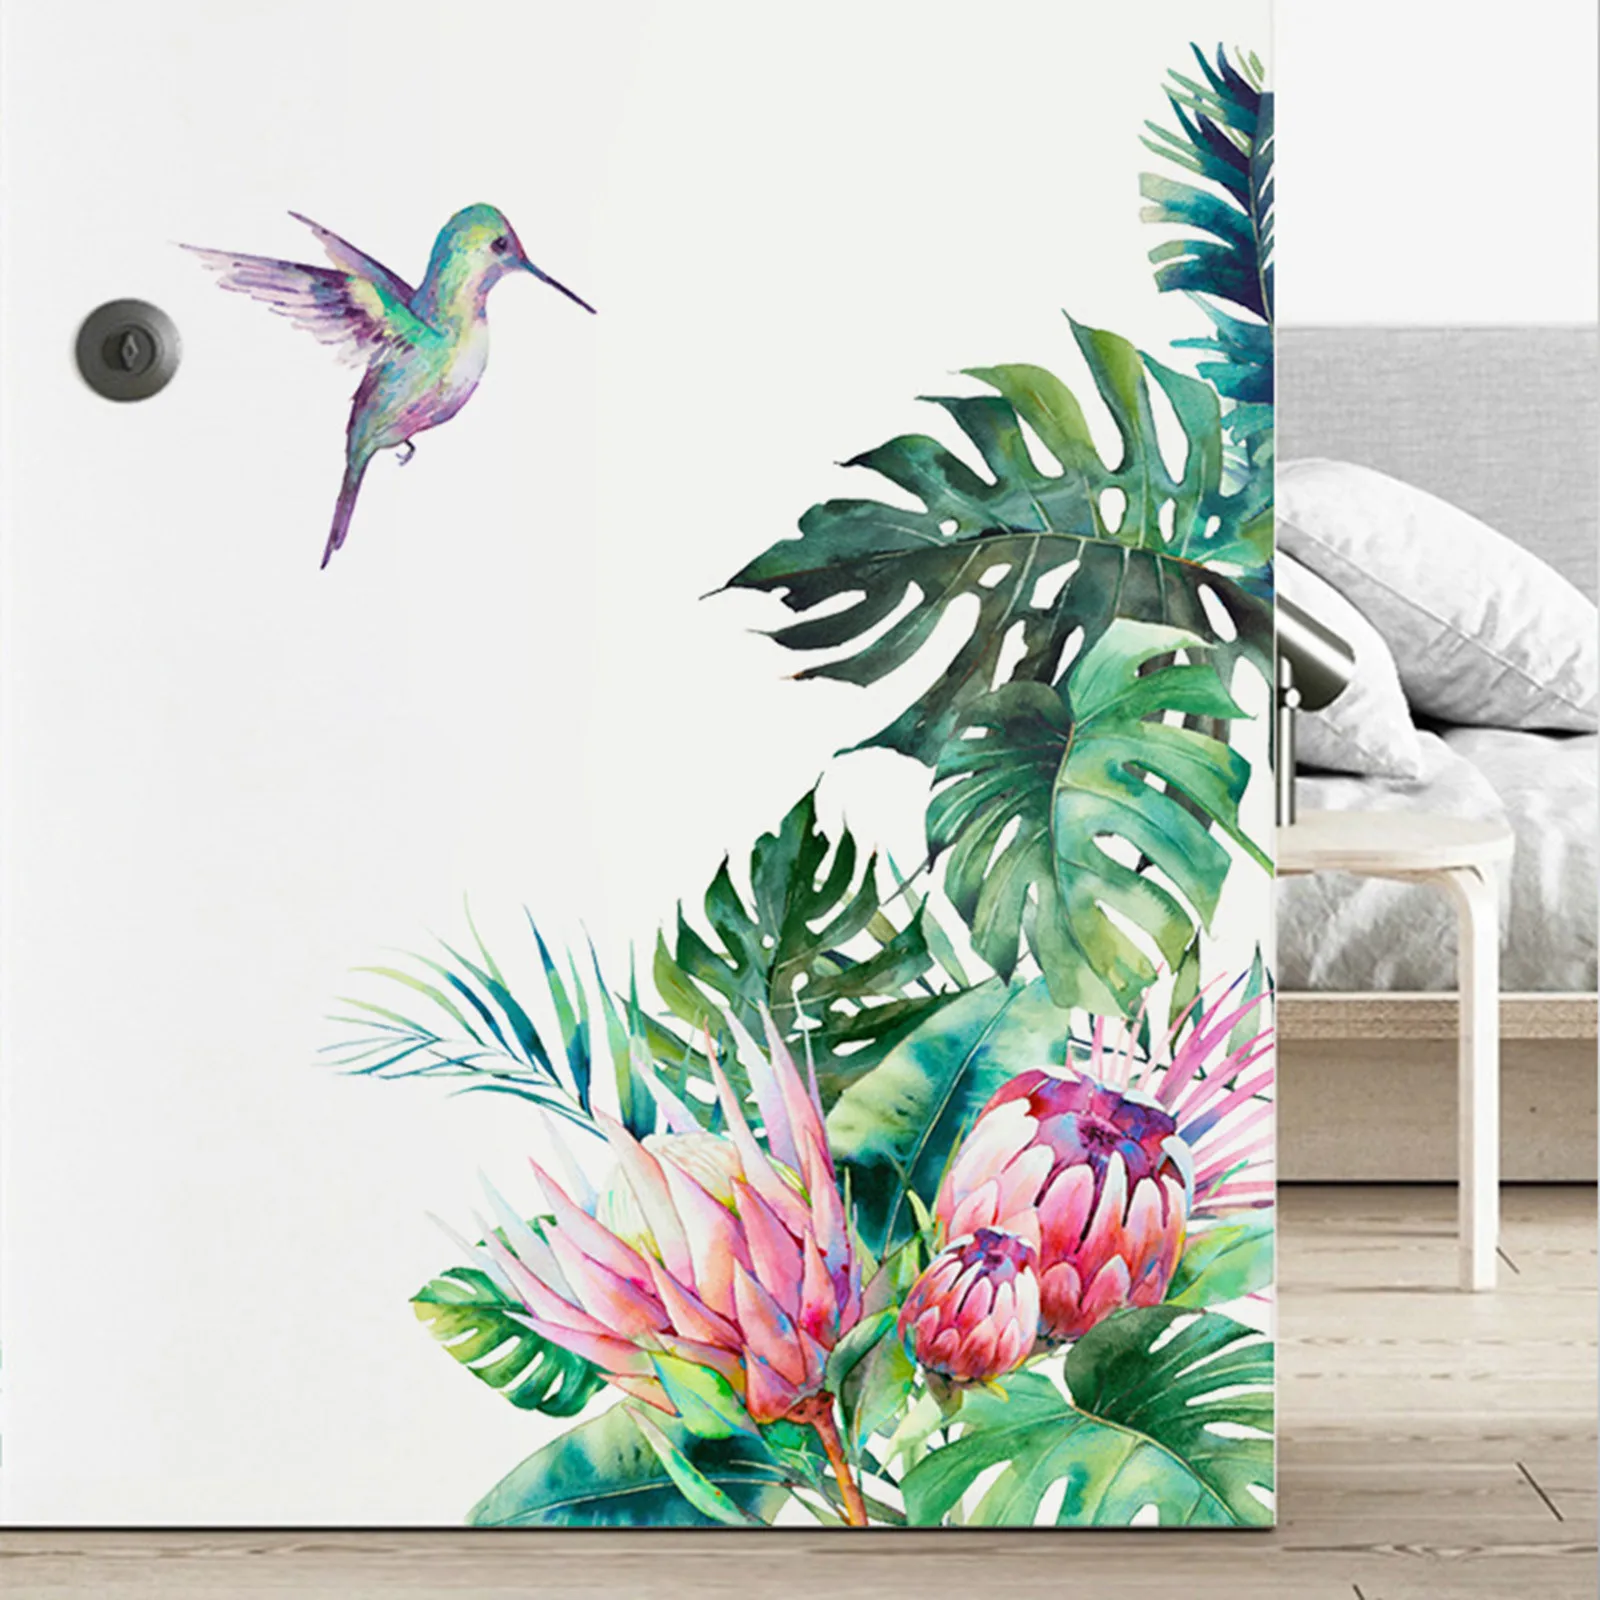 

Tropical Leaf Flower Bird Wall Sticker Home Decoration Living Room Bedroom Mural Art Wallpaper And Poster Diy Decal For Wall